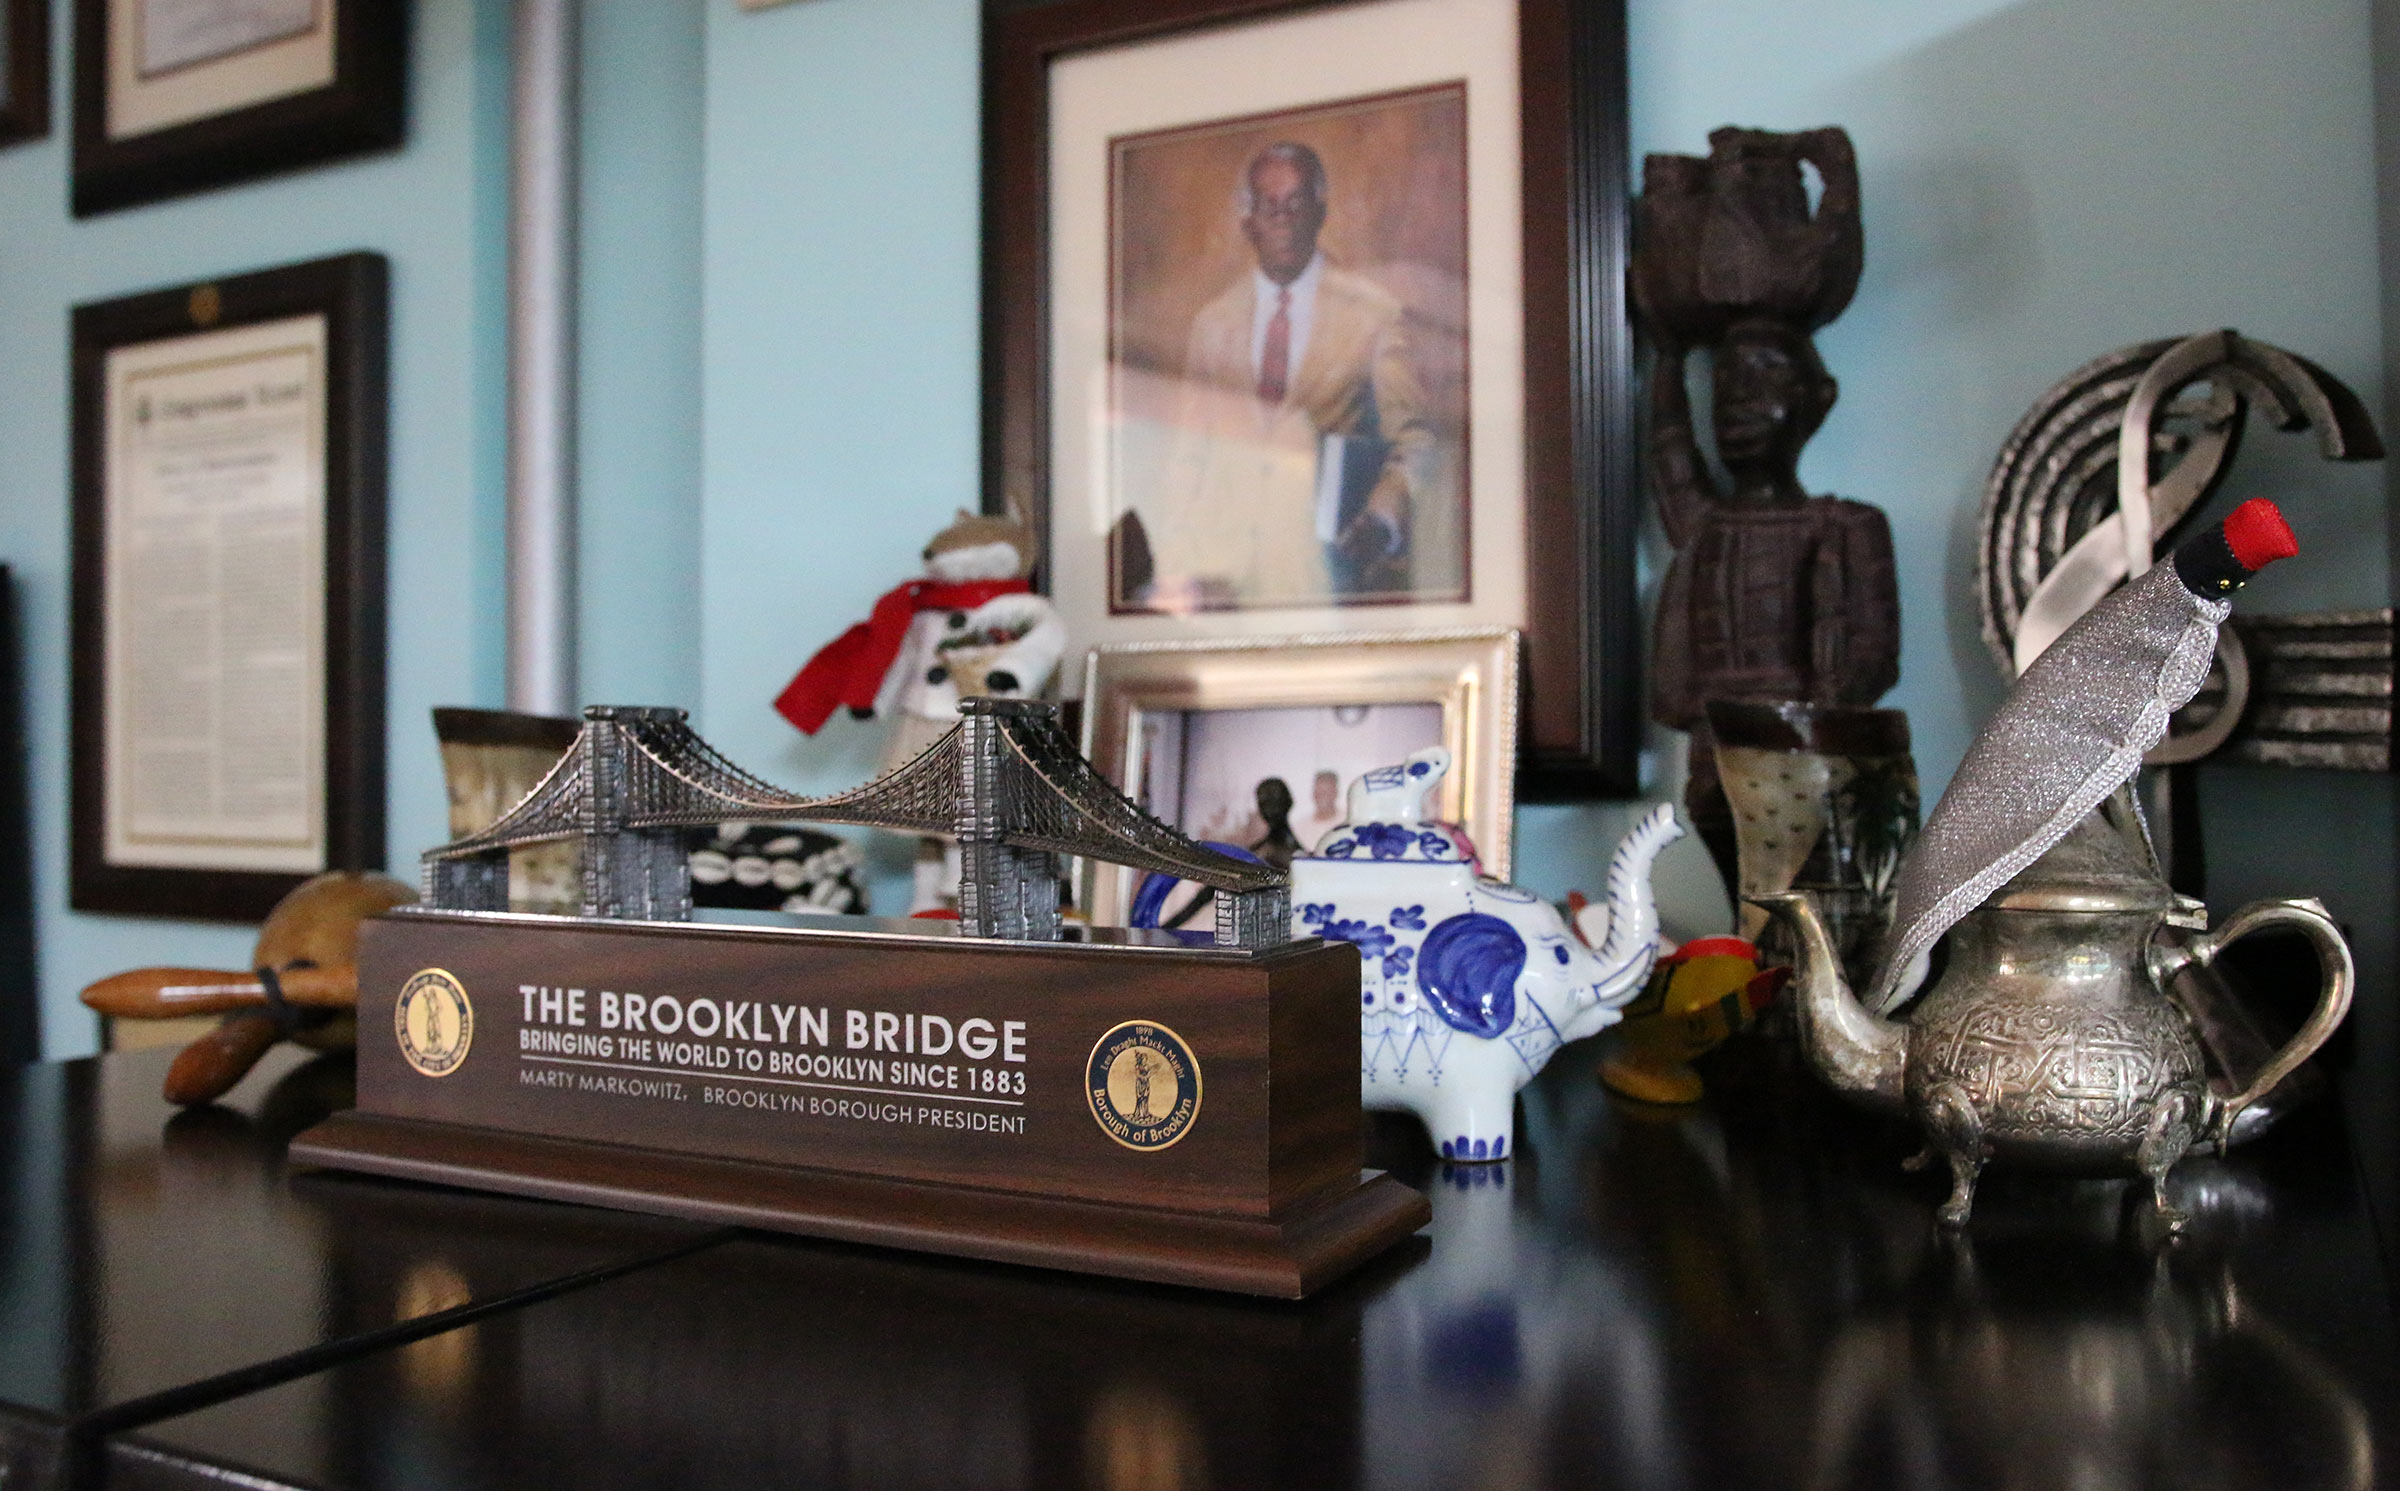 A shelf in Randy Weston's home featuring a variety of trinkets including a miniature model of the Brooklyn Bridge